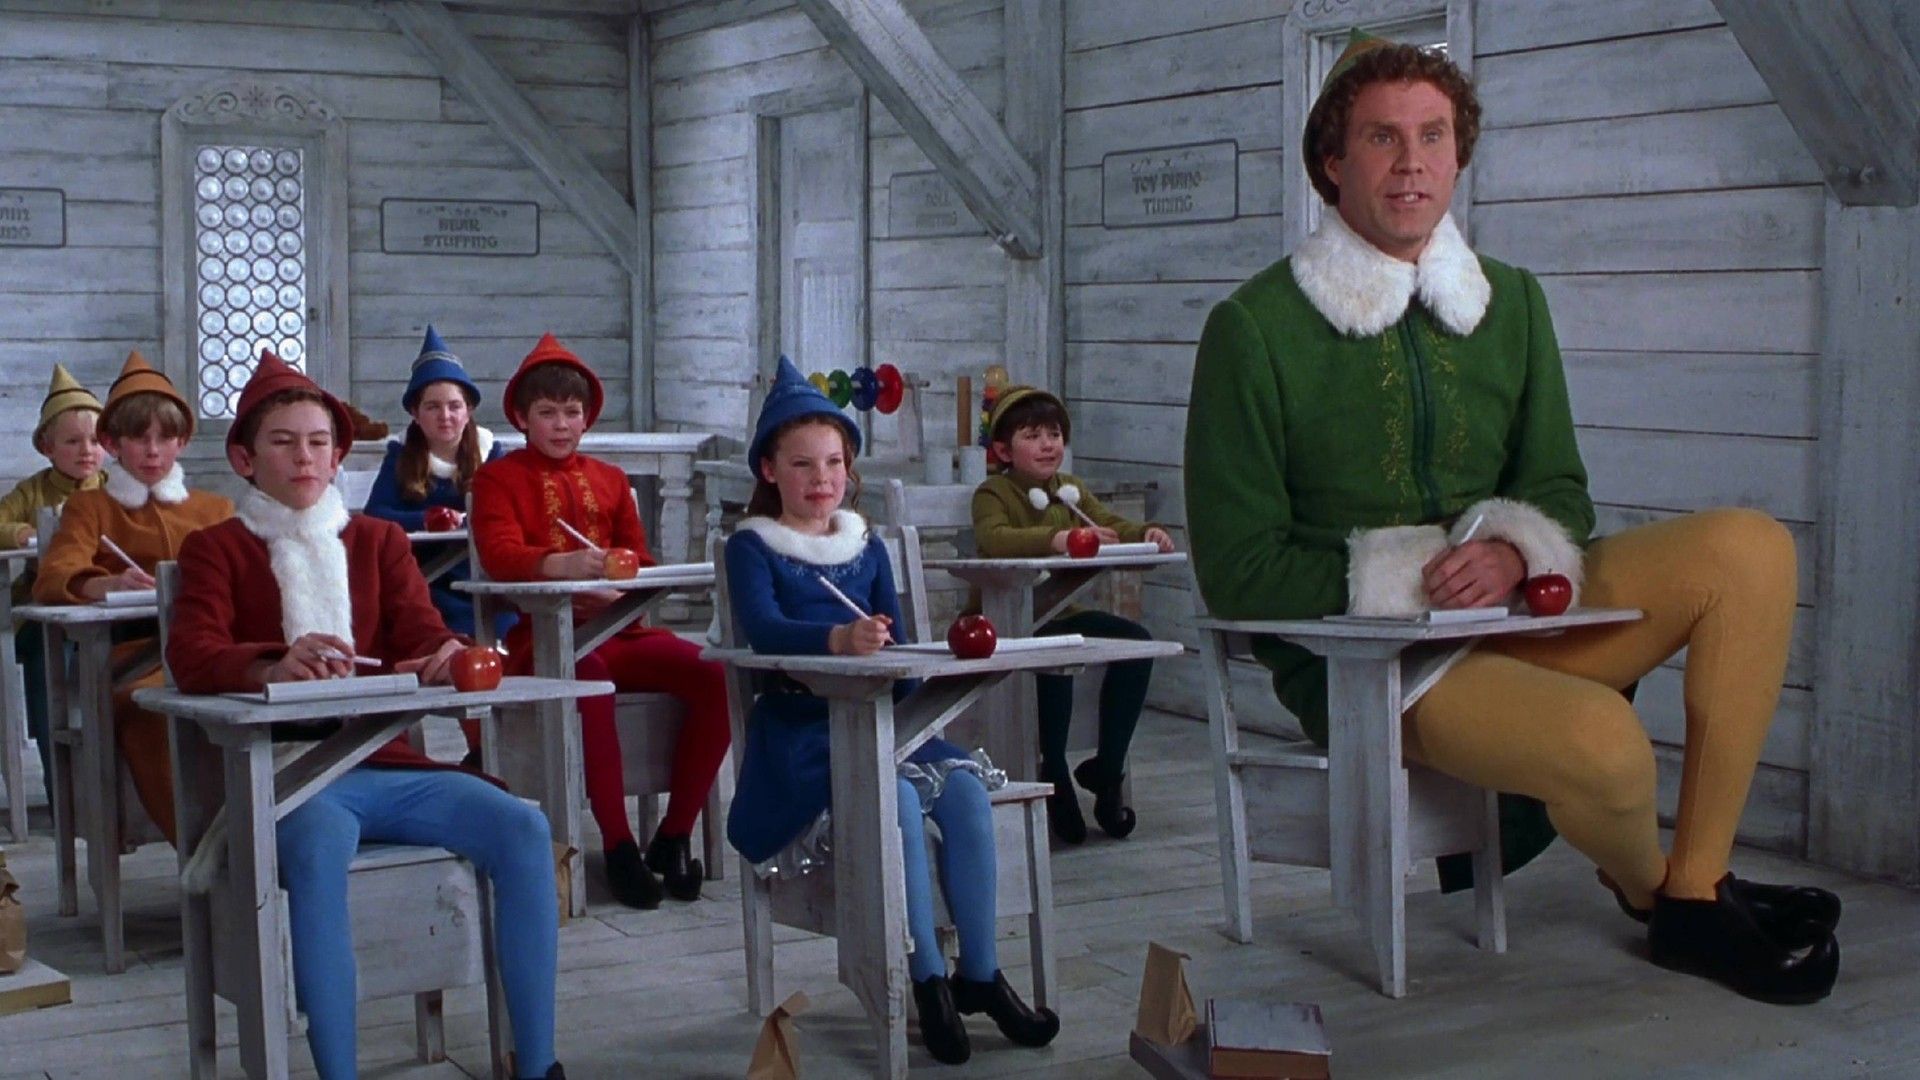 Behind the Scenes of 'Elf' and the Use of Forced Perspective